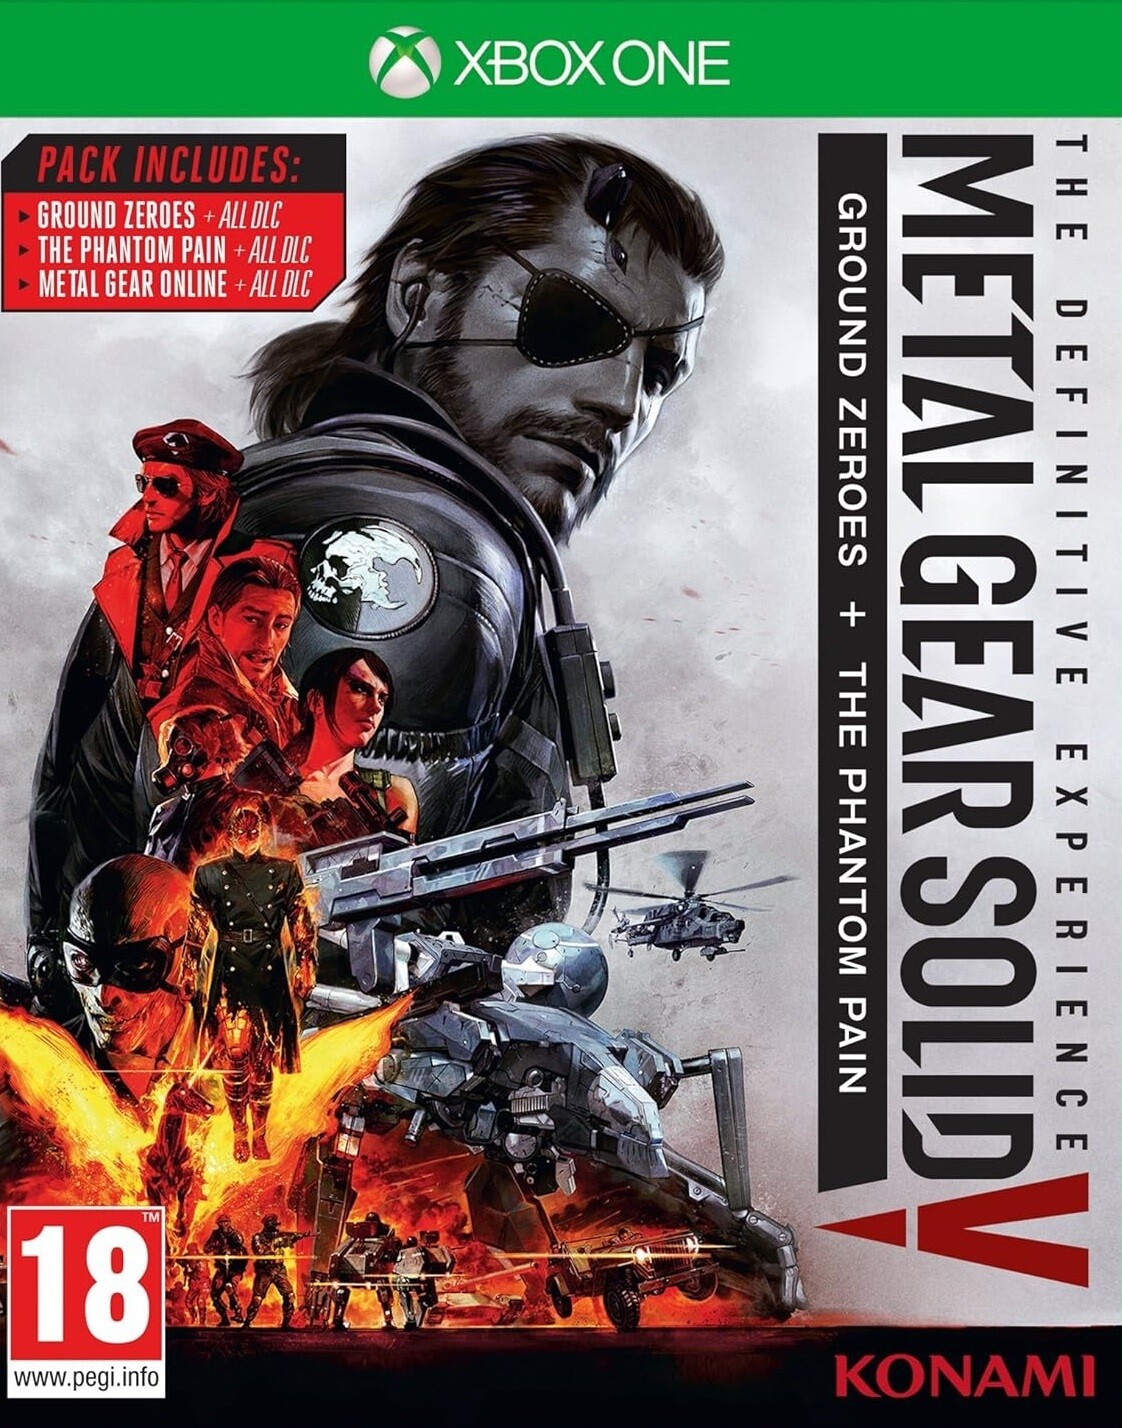 Metal Gear Solid V: The Definitive Experience (Ground Zeroes + The Phantom Pain) |Xbox ONE|